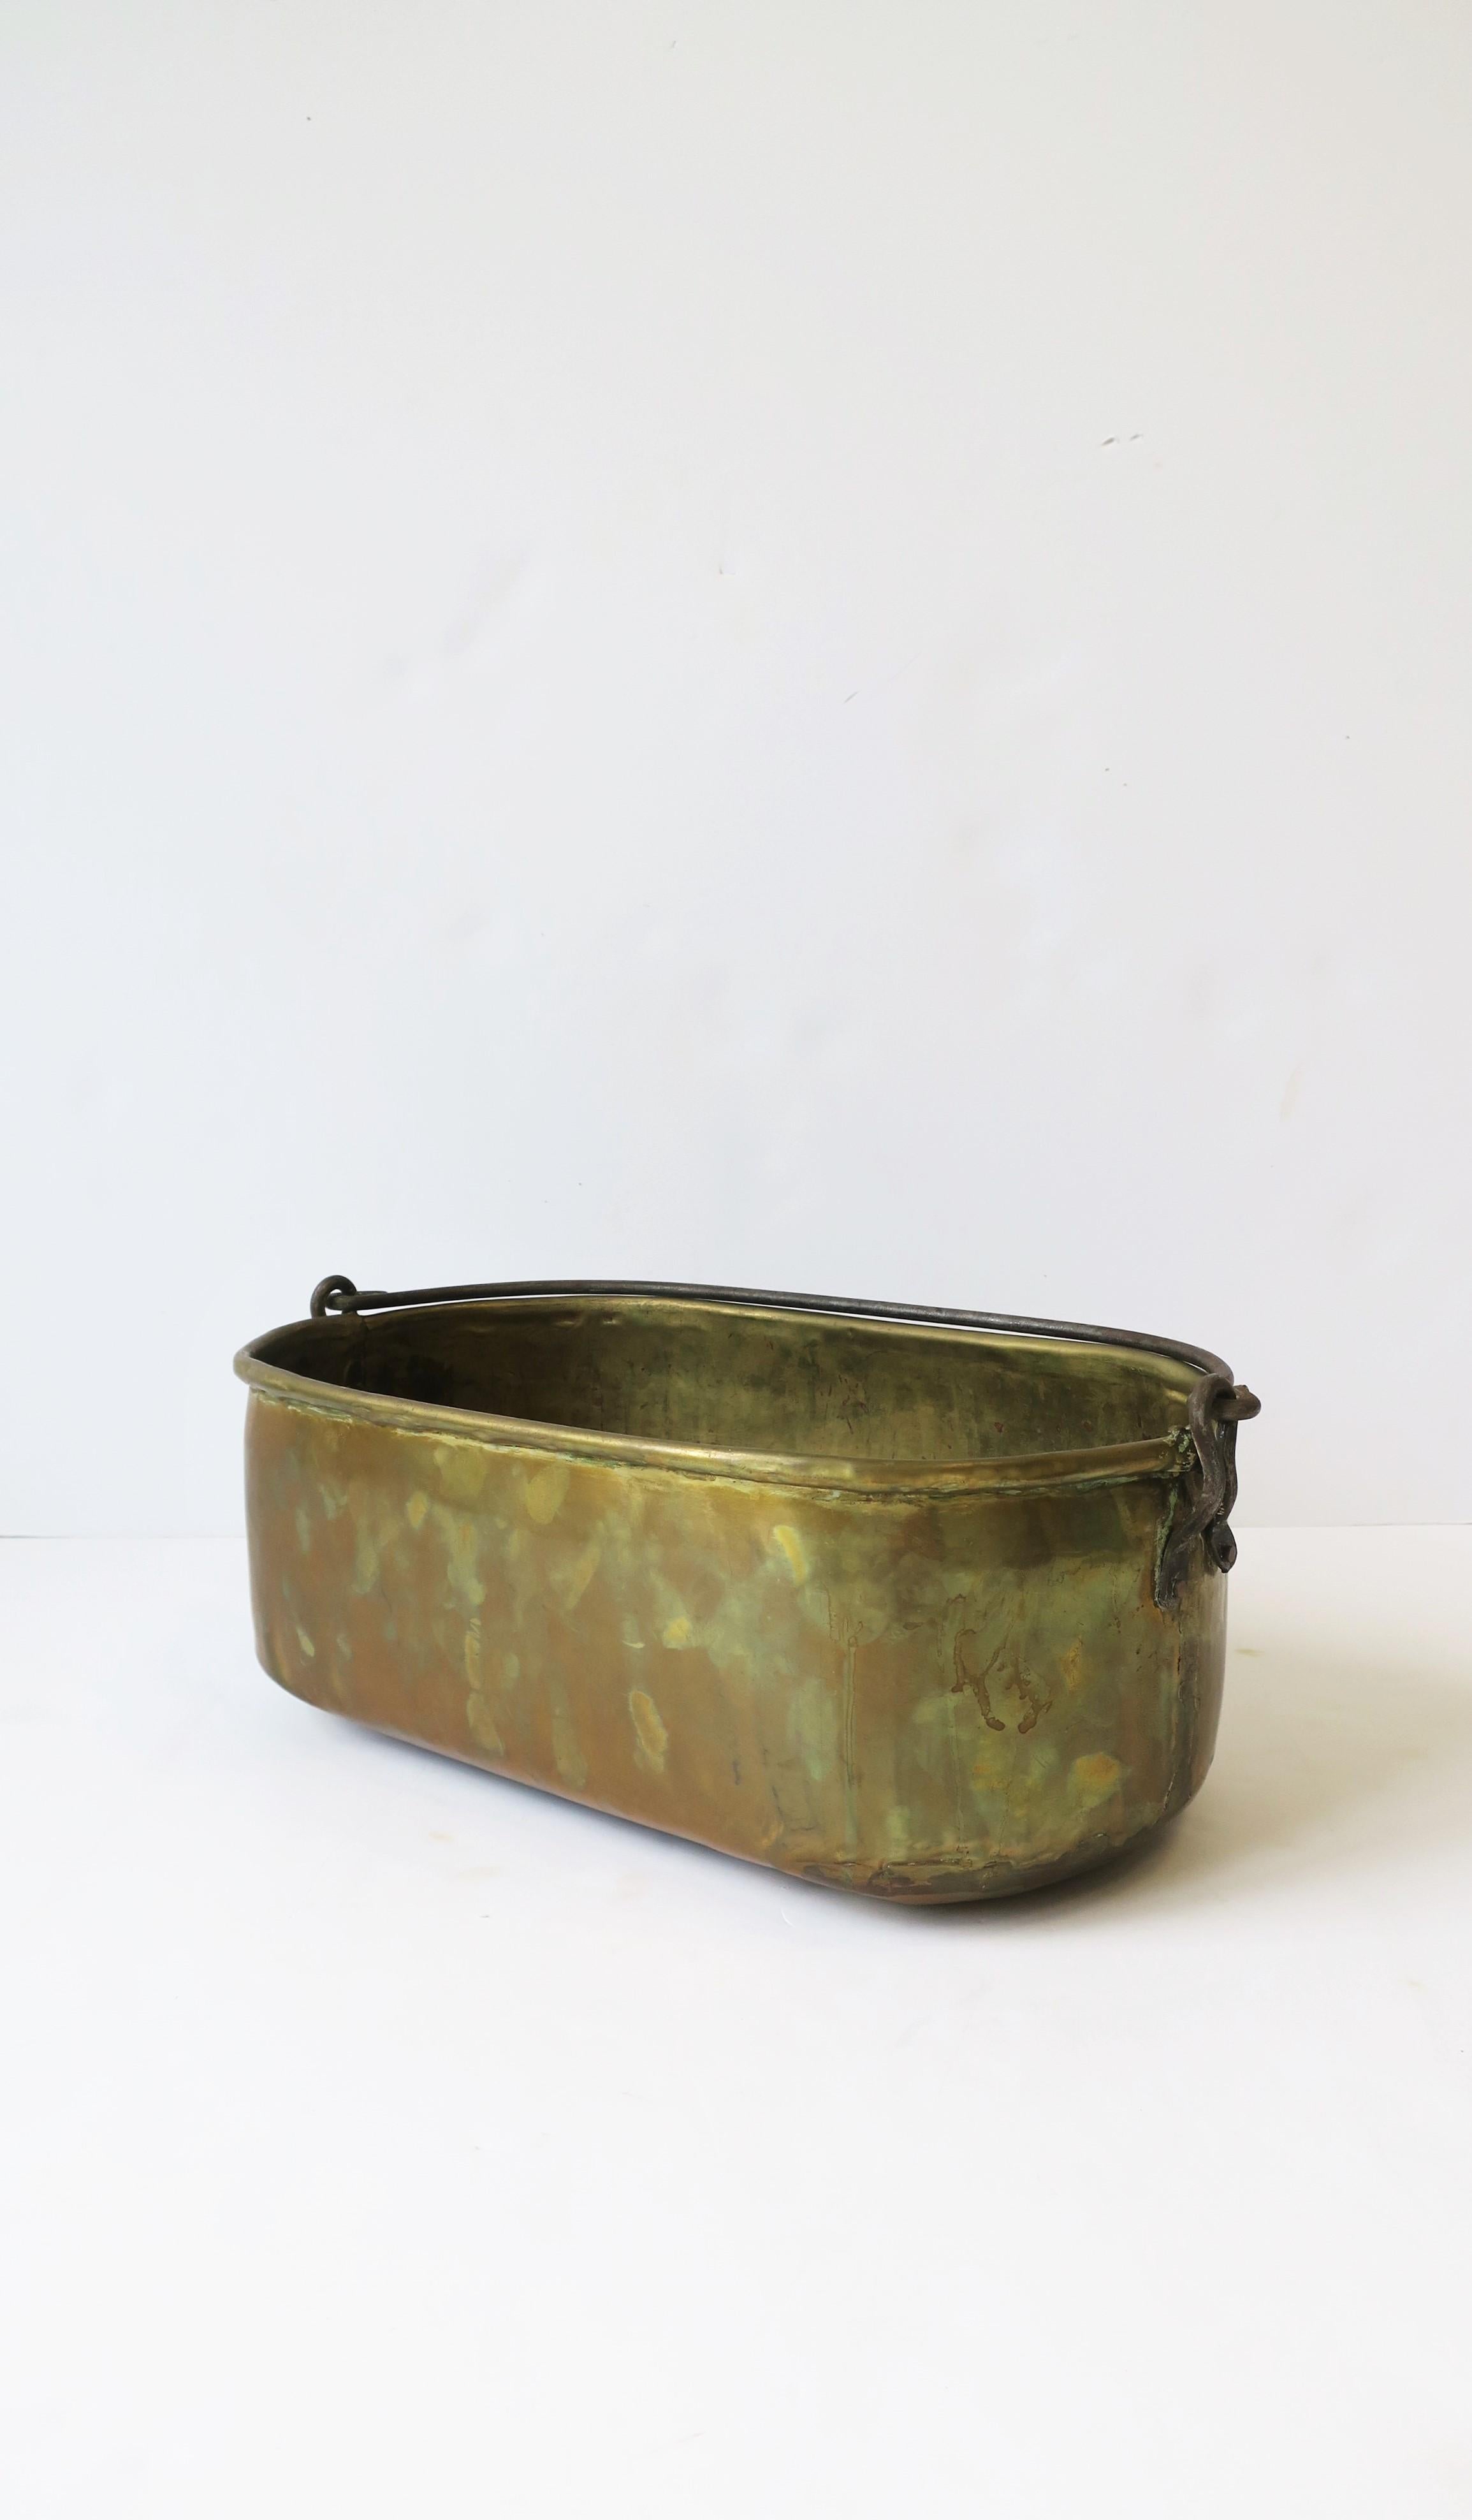 A beautiful Irish brass bucket with handle, circa 20th century, Republic of Ireland. Brass bucket is oblong with copper nails. A great decorative piece or for a bar/entertaining area as an ice bucket or cooler for wine, Champagne, beer, etc. Piece